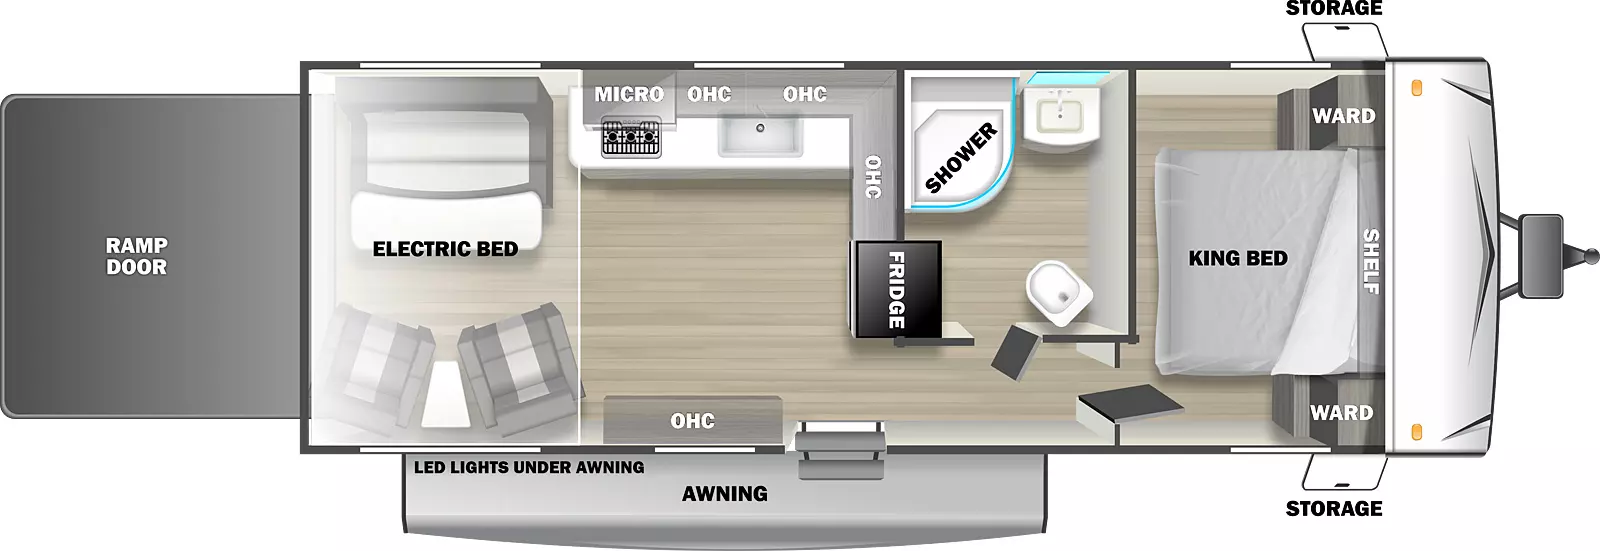 The 241GLE has one zero slideouts and one entry. Exterior features a rear ramp door, an awning with LED Lights under, and front pass thru storage. Interior layout front to back: King bed with shelf above and wardrobes on each side; off-door side full bathroom; refrigerator and kitchen countertop along inner wall that wraps to off-door side with overhead cabinet, sink, microwave and cooktop; door side entry and overhead cabinet; rear seating and table with electric bed above.